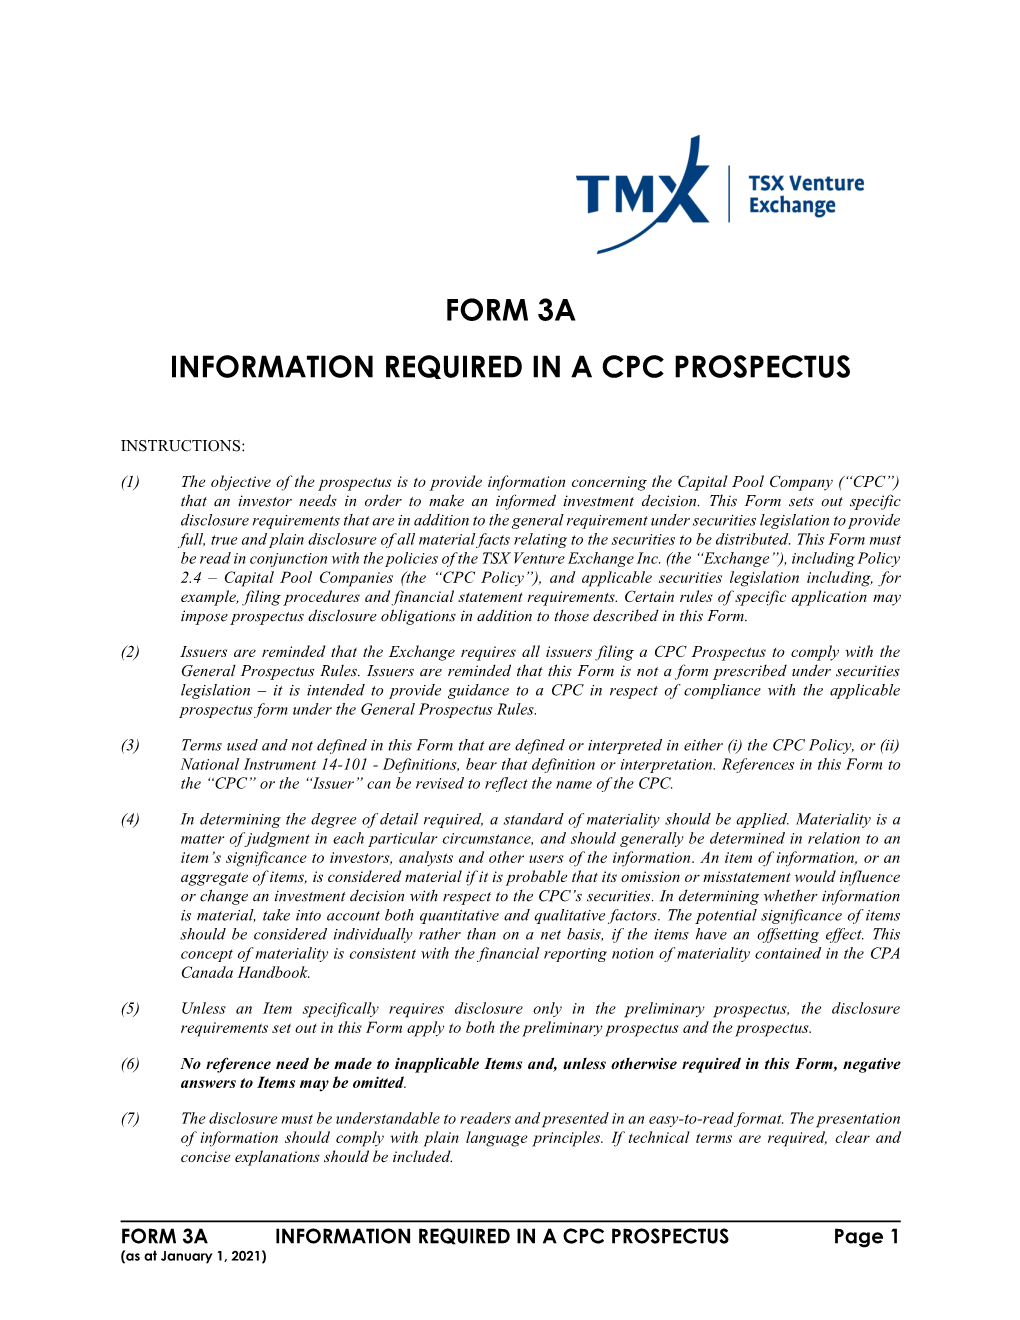 Form 3A Information Required in a Cpc Prospectus